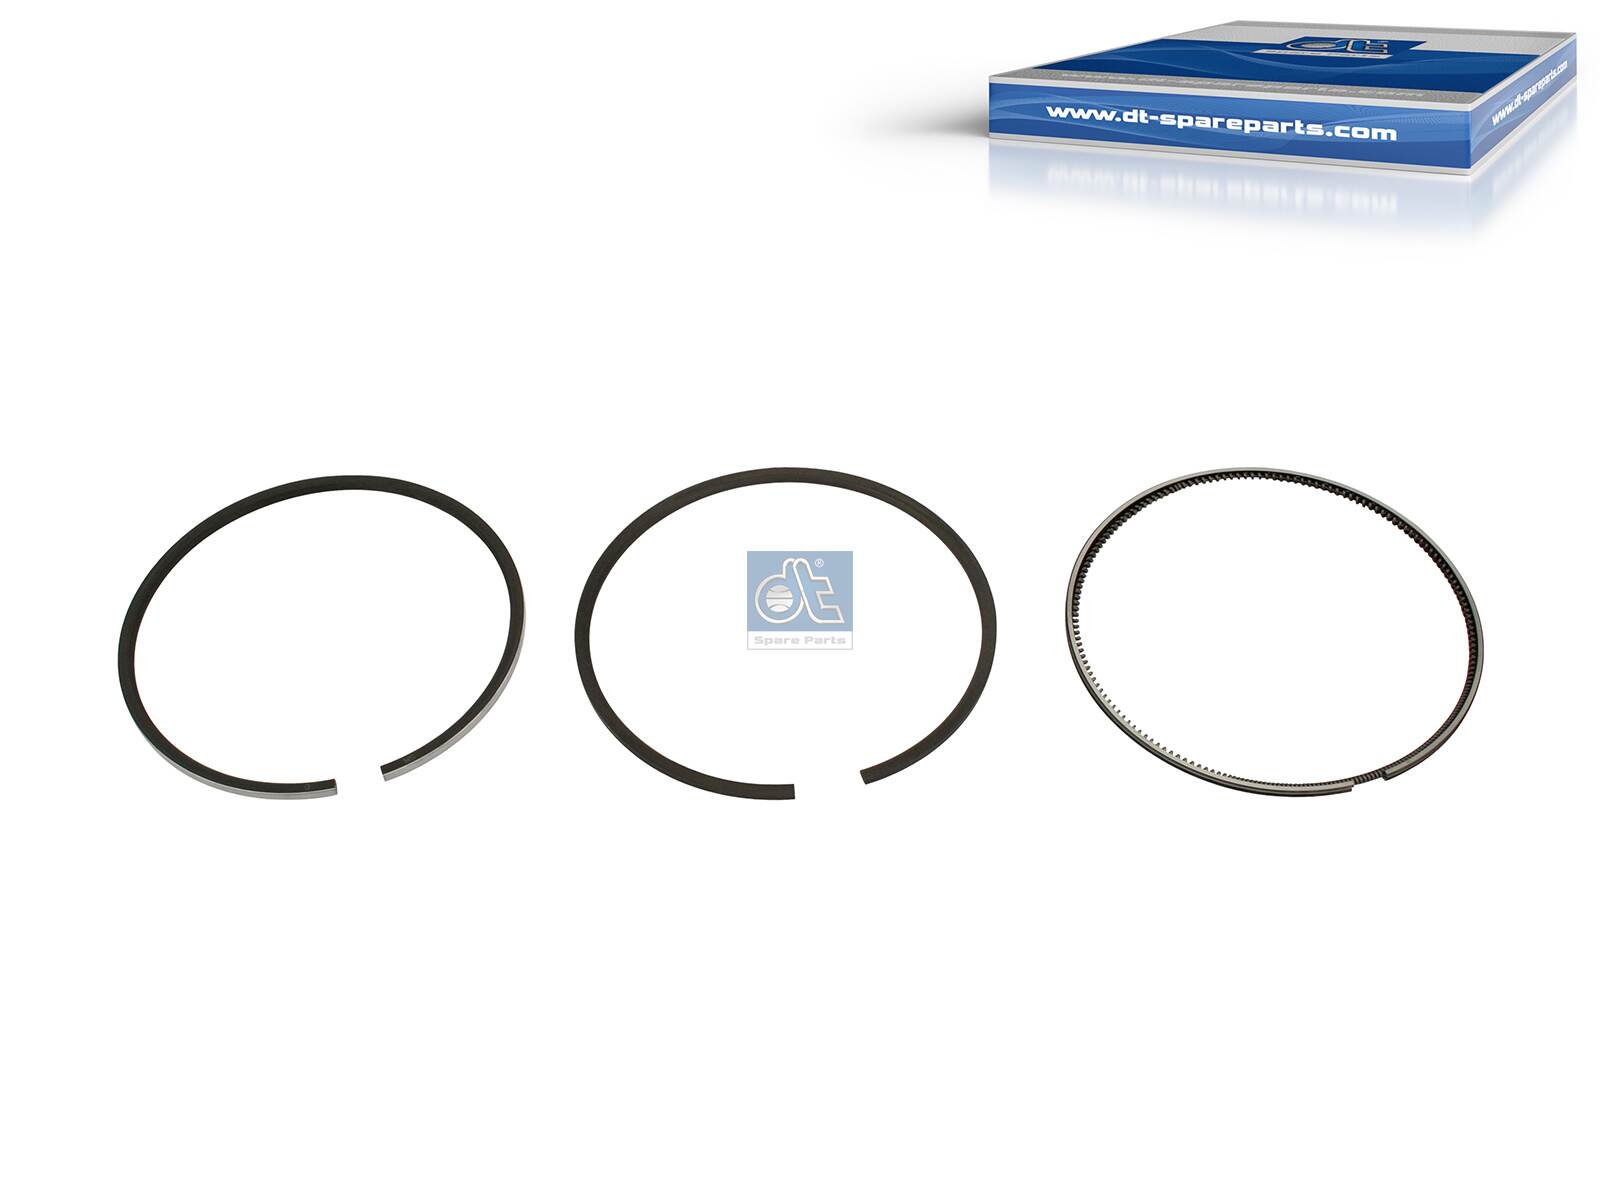 2.90125, Piston Ring Kit, DT Spare Parts, 20747511, 7420747511, 21253763, 7421253763, 038.247, 03873N0, 08-434400-00, 103343, 800075710000, PRK-511, A71800